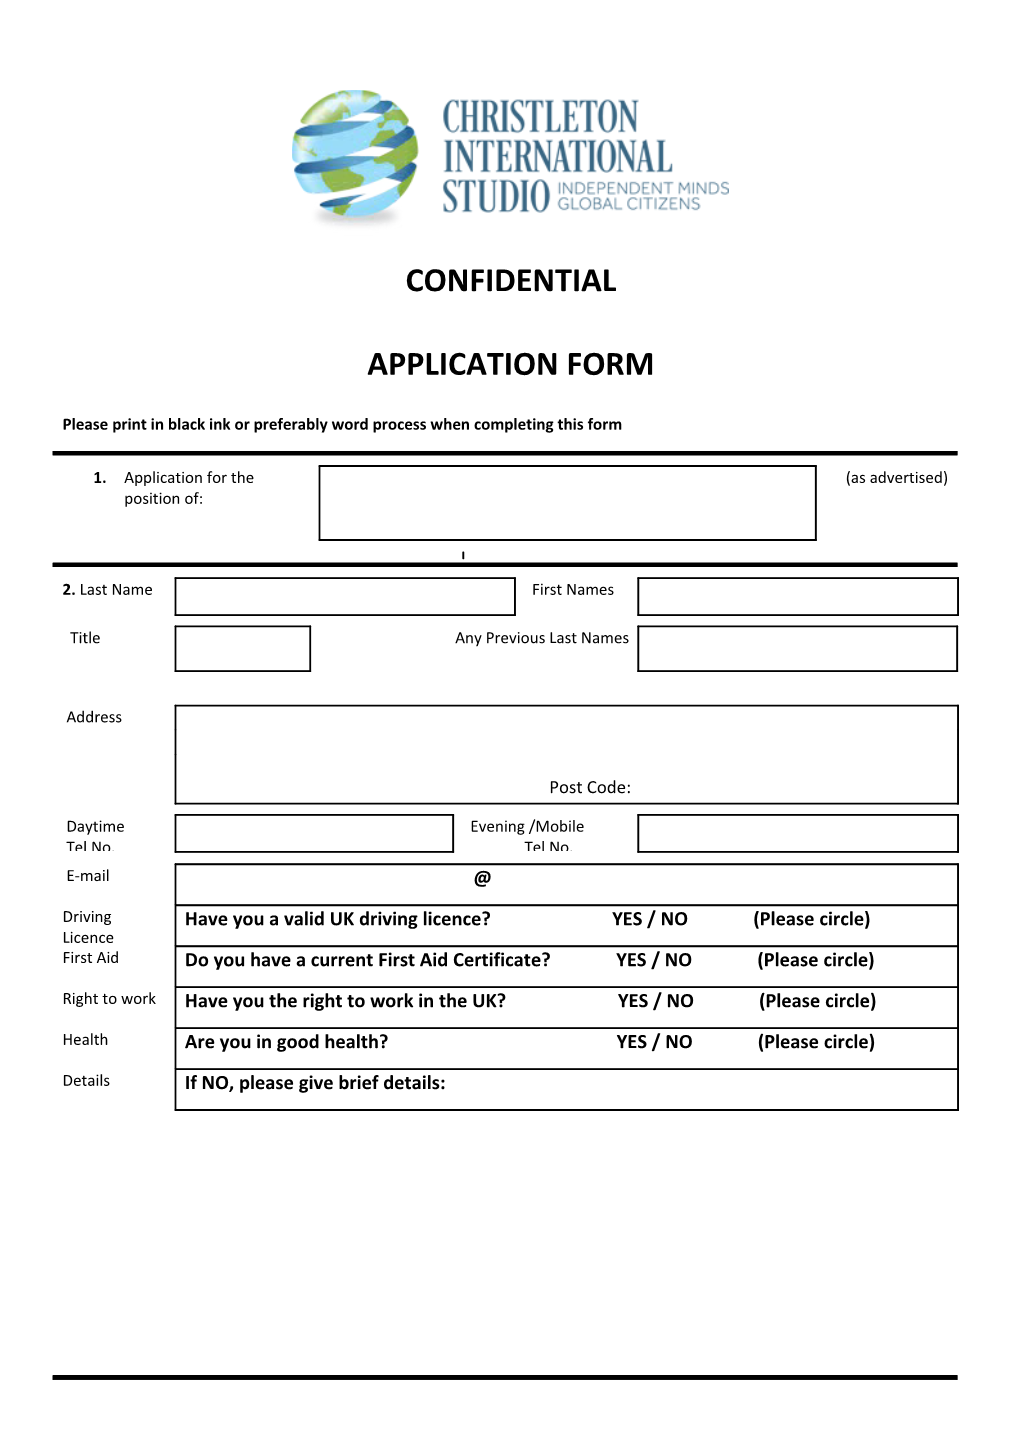 Please Print in Black Ink Or Preferably Word Process When Completing This Form